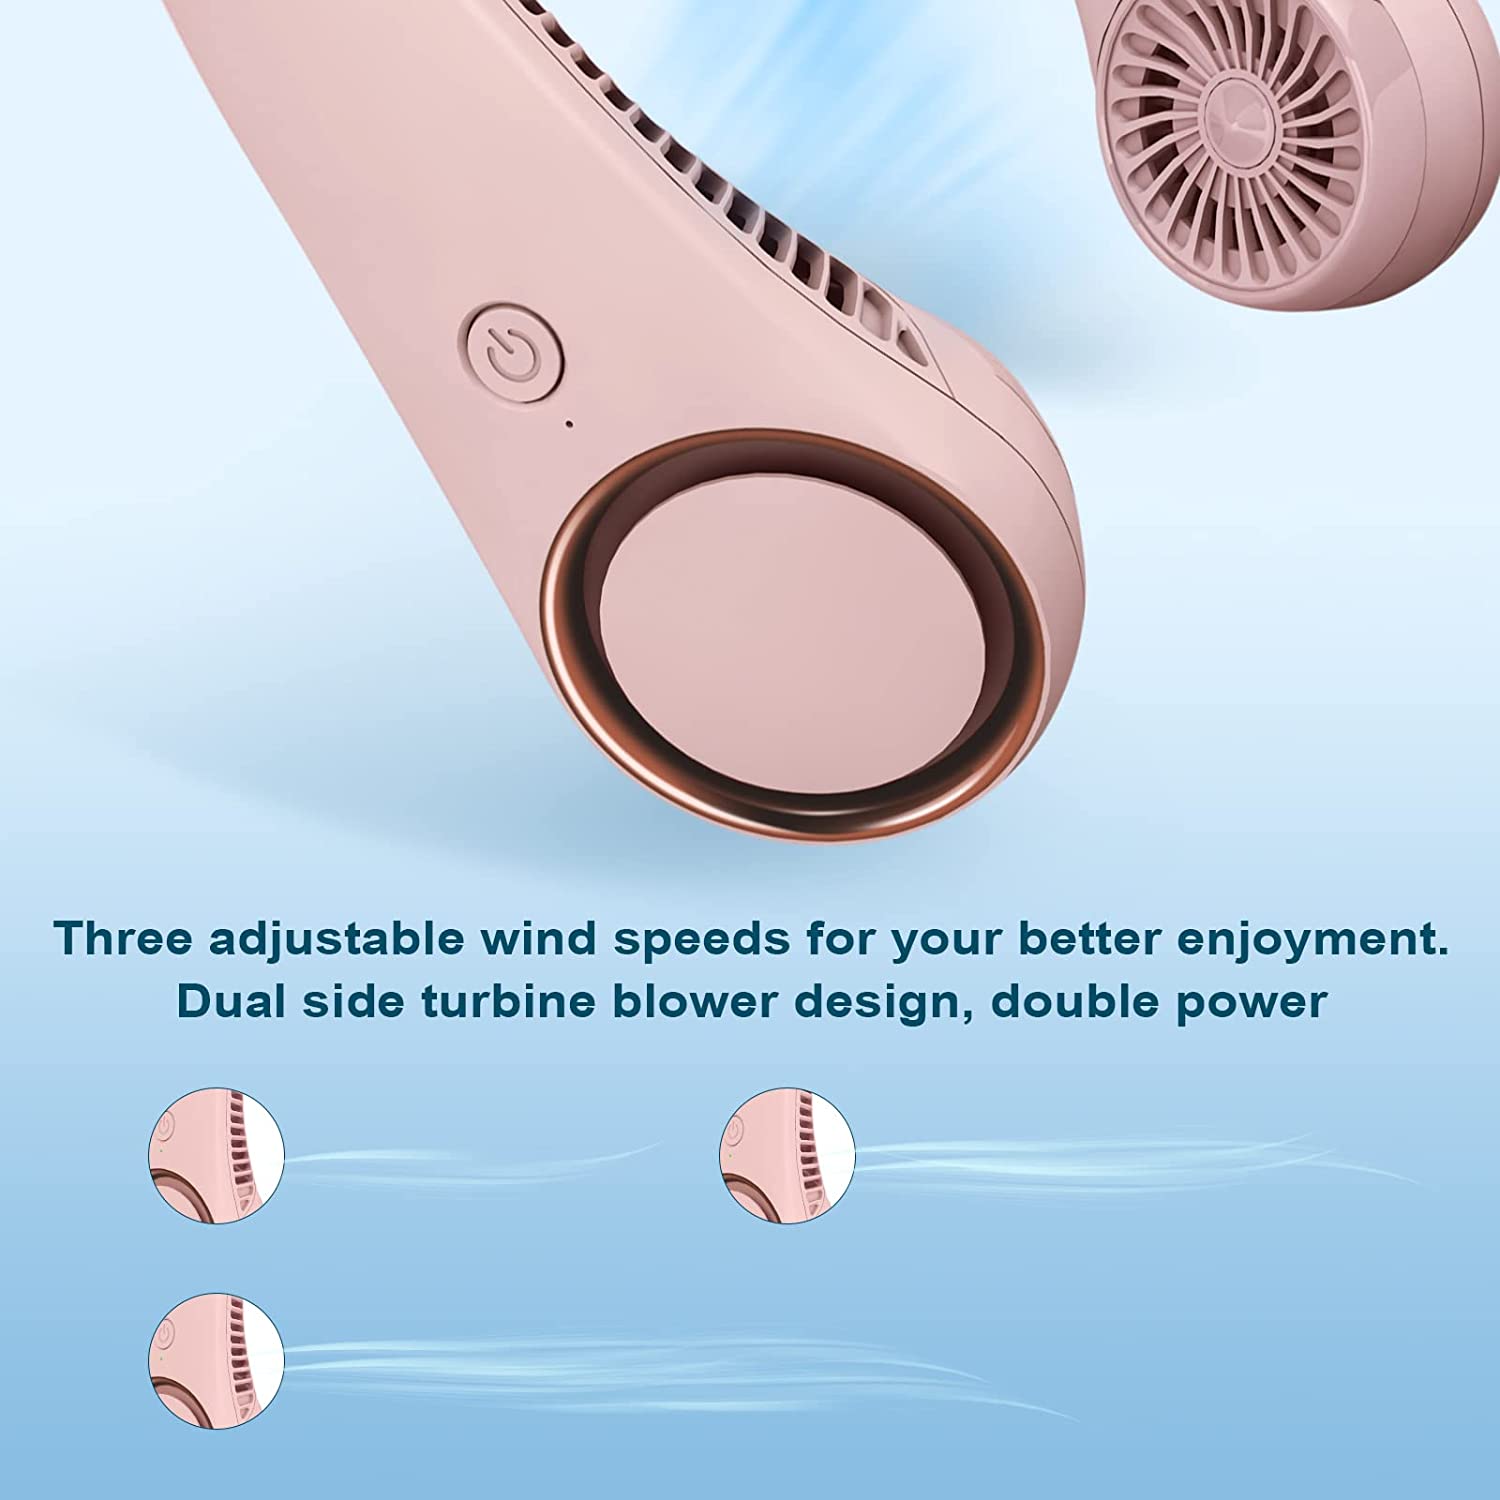 USB Portable Neck Fan ^ USB Desk Fan Table Fan with Strong Airflow & Quiet Operation, Portable Cooling Fan Speed Adjustable with Rotatable Head for Home Office Bedroom Travel Camping Table